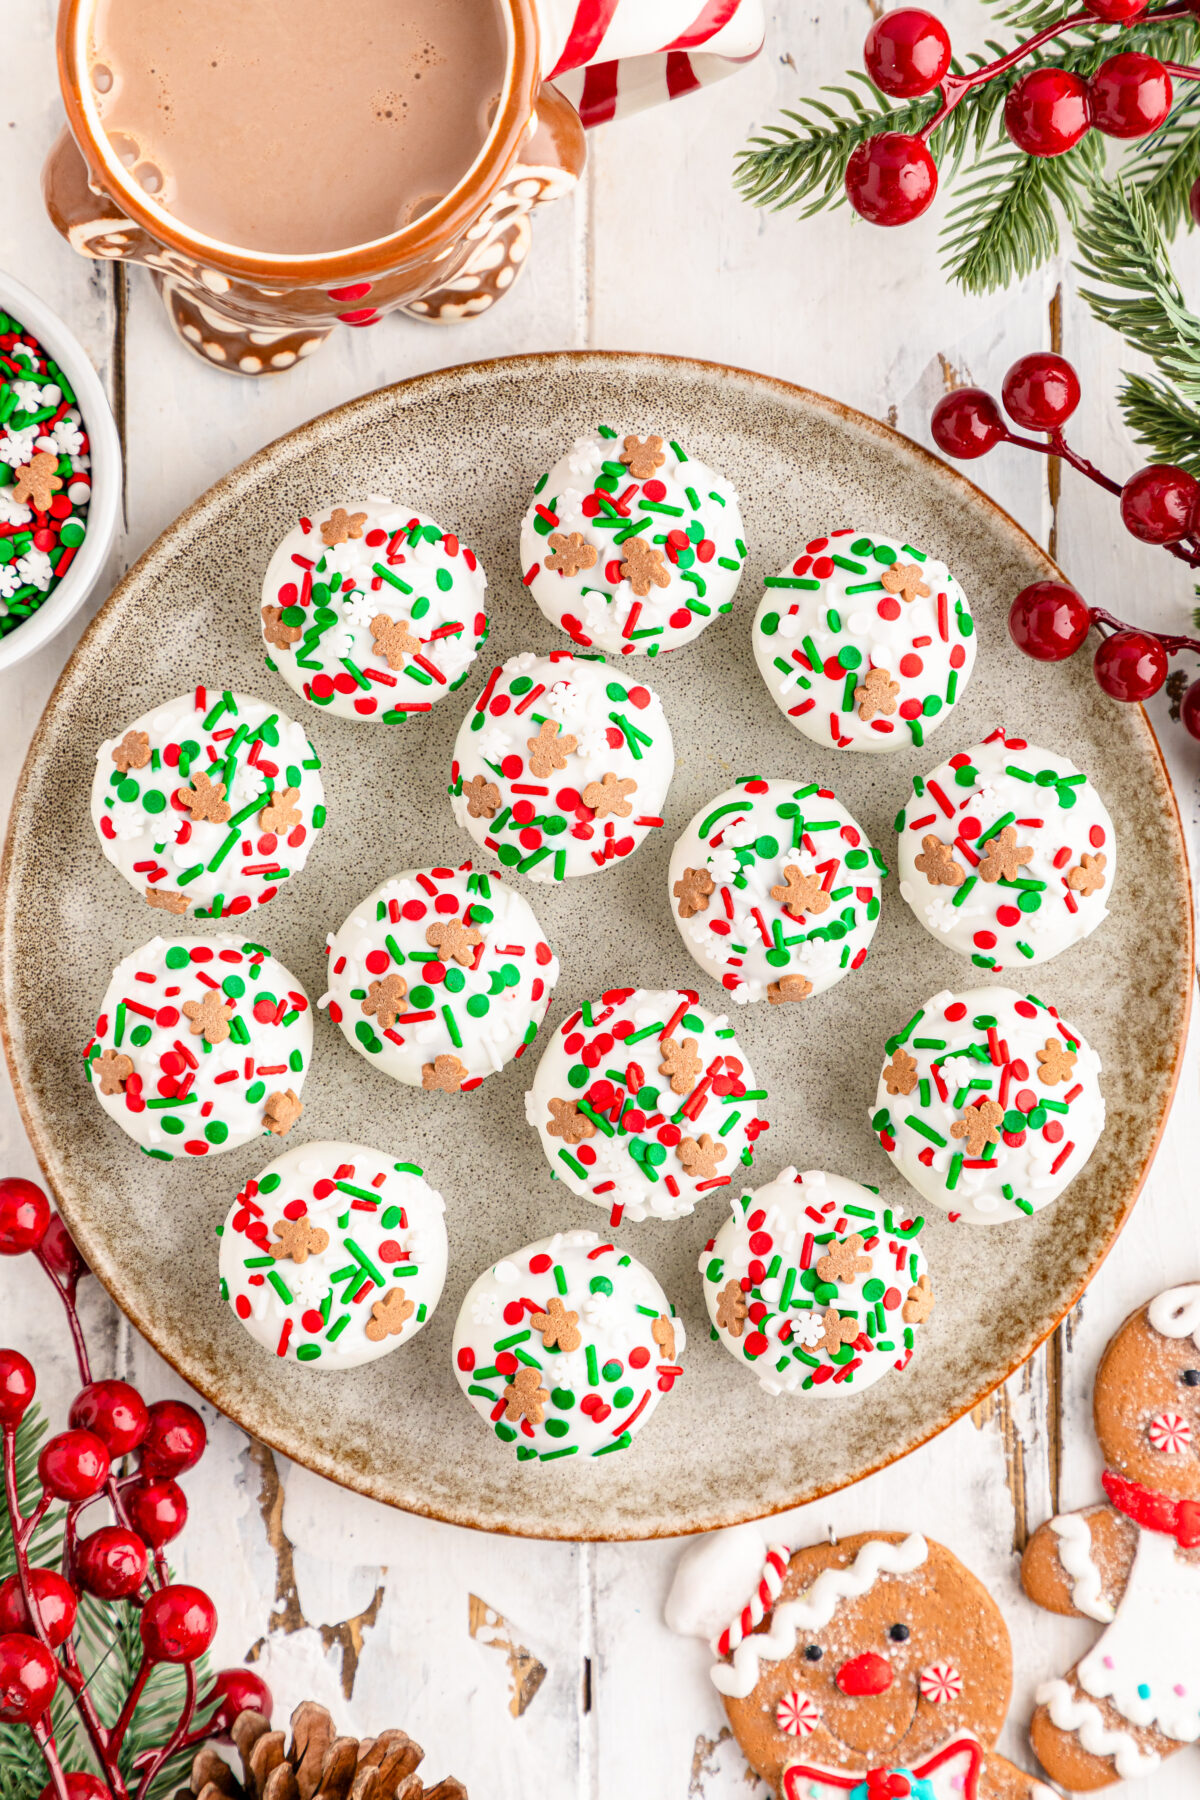 Looking to make a festive holiday treat? Check out our recipe for gingerbread cake balls - they're so easy and sure to be a hit!